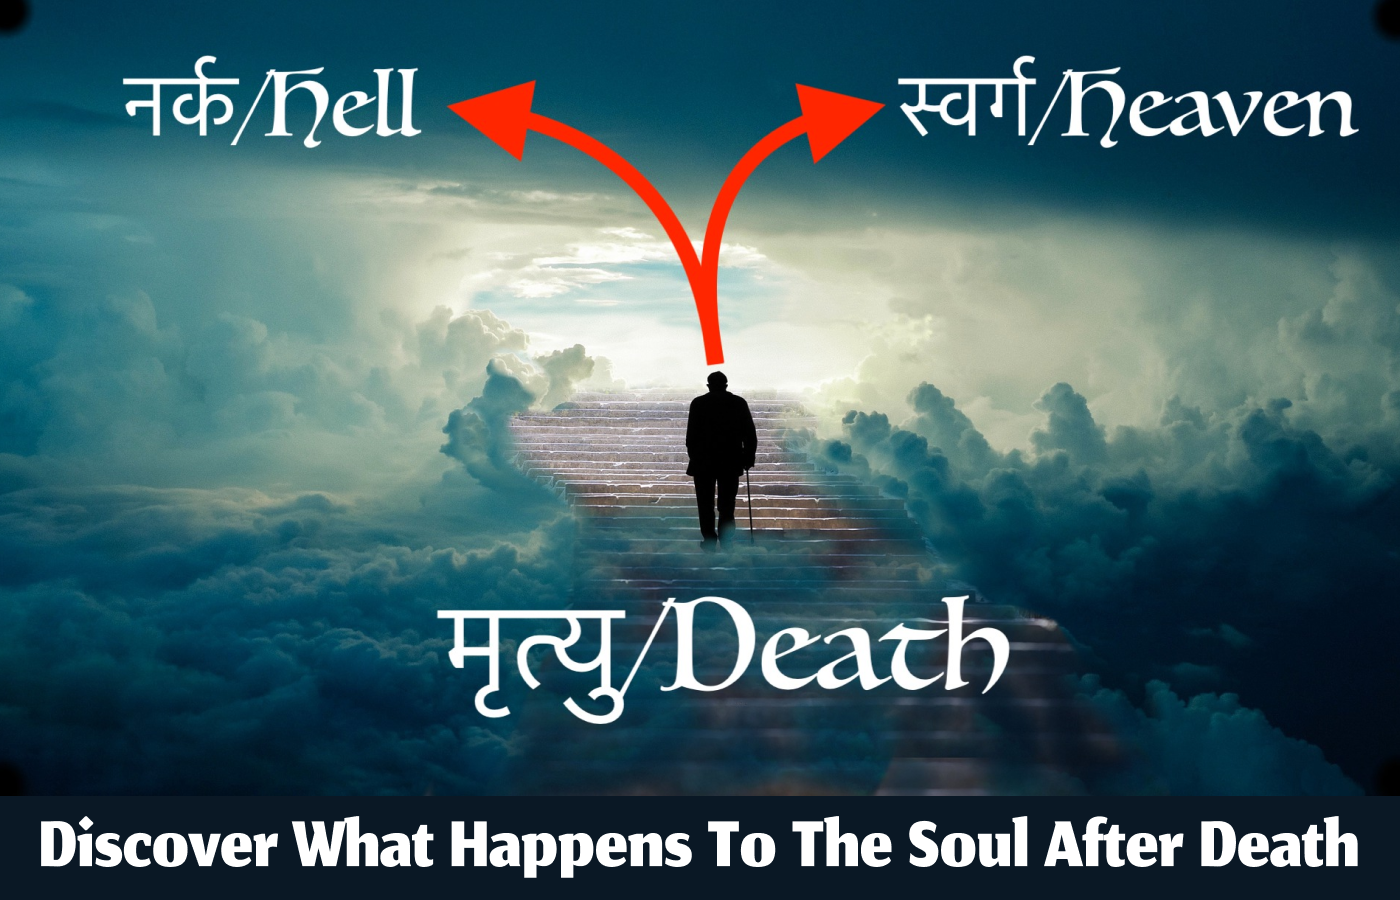 Lord Vishnu Niti: Discover what happens to the soul 47 days after death